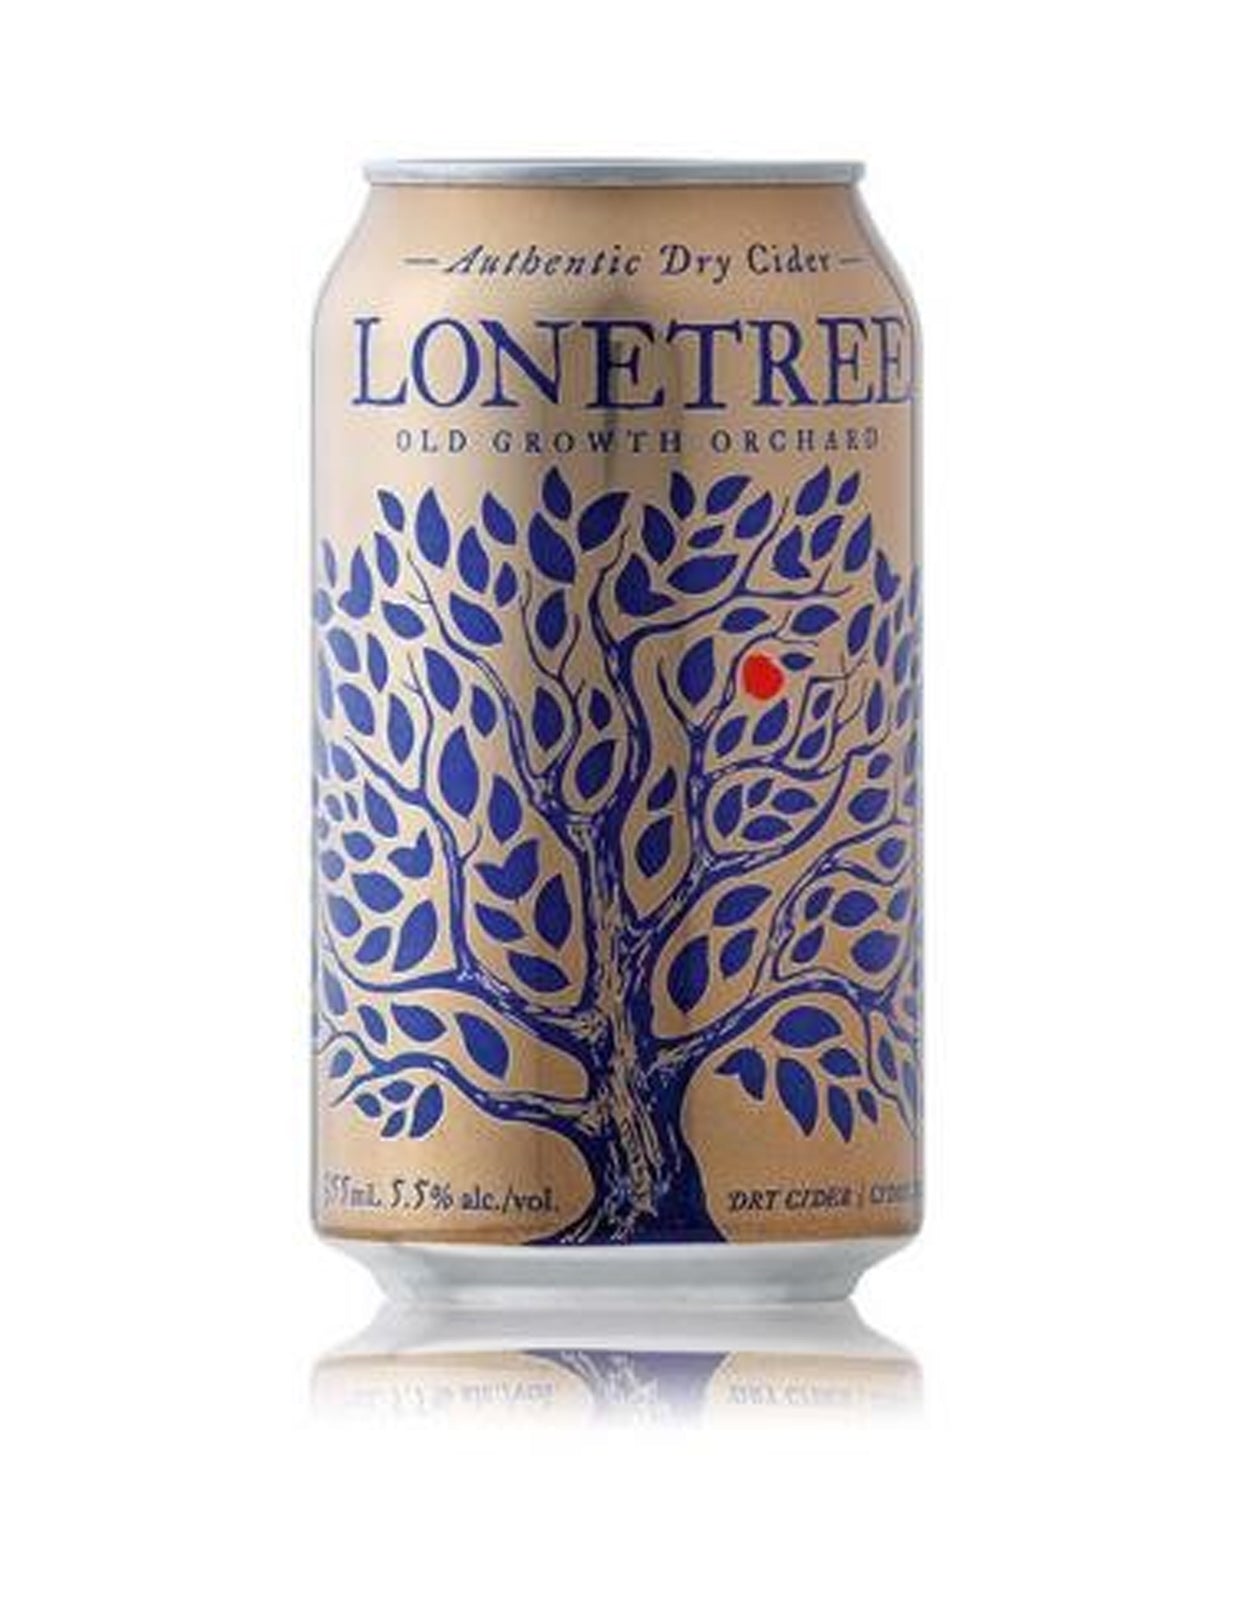 Lonetree Authentic Dry Cider 355 ml - 6 Cans